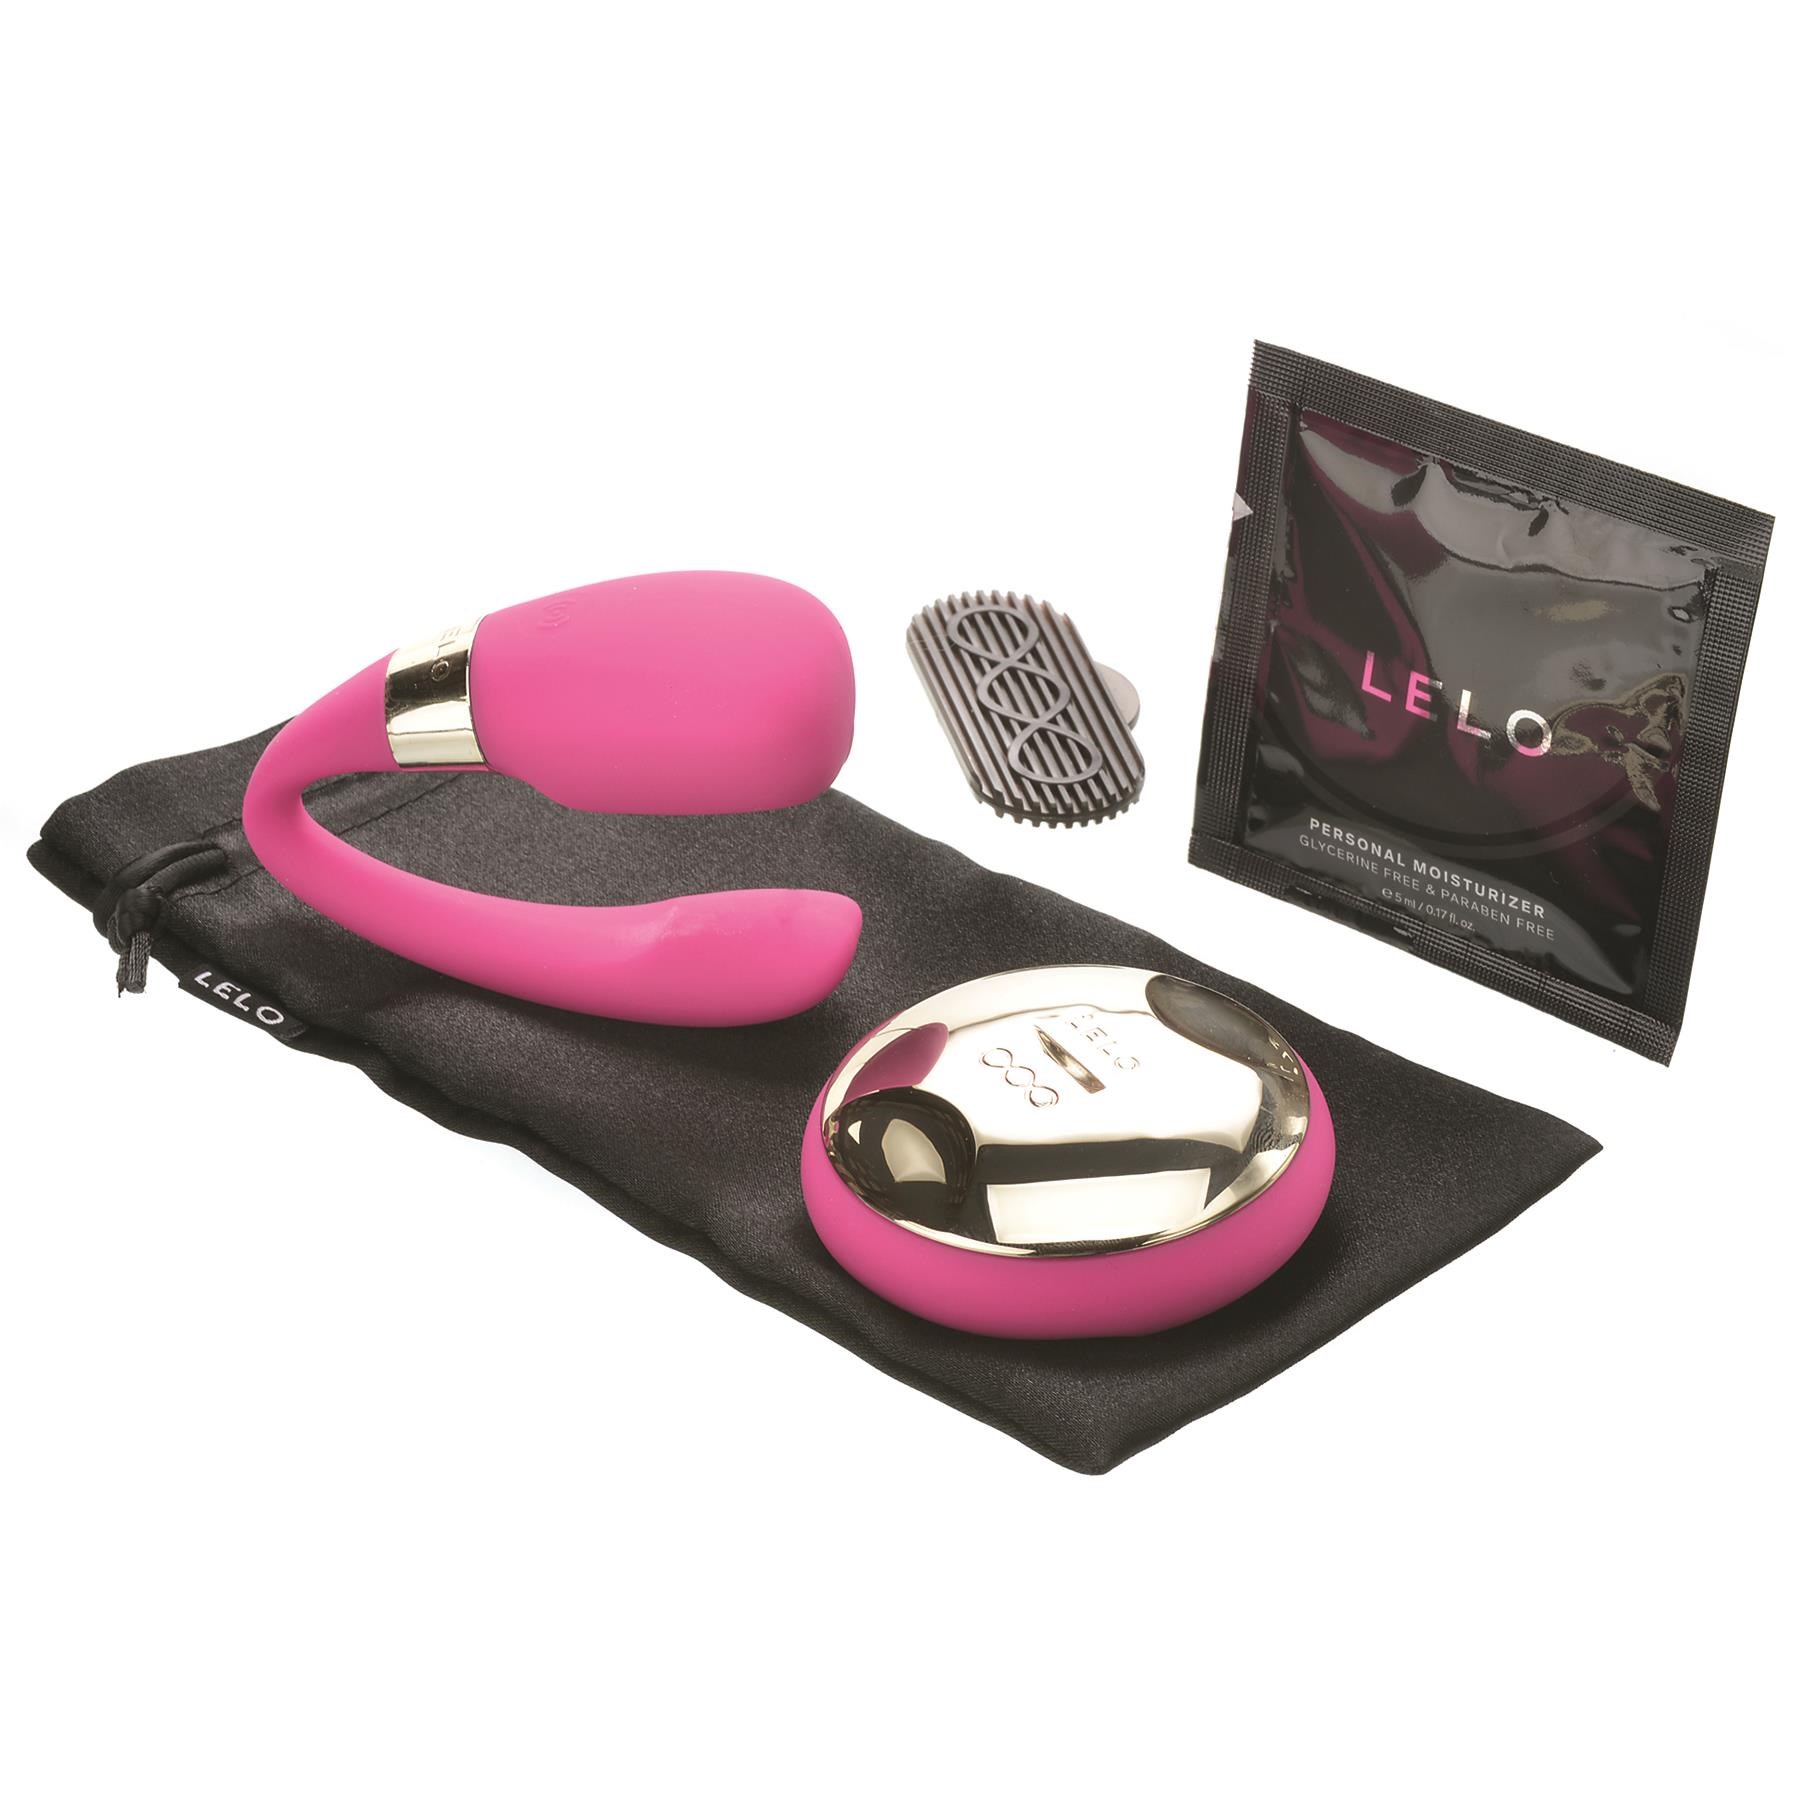 Lelo Tiani 3 Remote Control Couples Massager Showing All Components #2